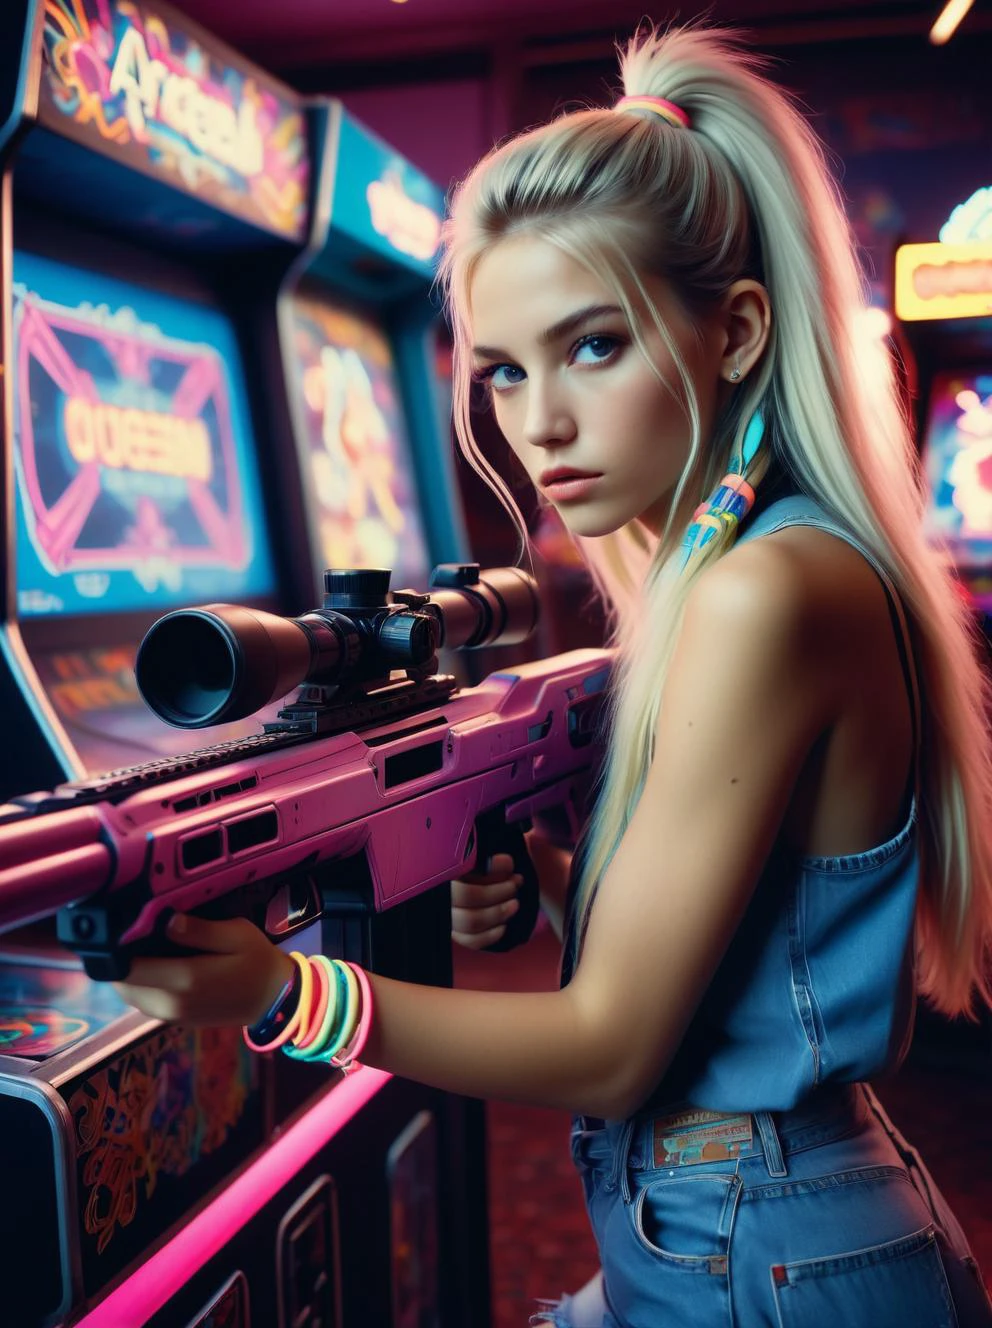 style of Richard Avedon, style of Hasselblad,photorealistic, grainy, indoors, moody lighting,20yo woman, 
 Sniper Rifle, aiming at arcade machine,
long platinum blonde straight hair in ponytail with neon scrunchie,looking at viewer from three quarter angle tilted neck,neon lights flickering,layers of bright friendship bracelets,
vintage arcade machines in the background,,vibrant color palette dominated by neons magentas and vibrant blue,